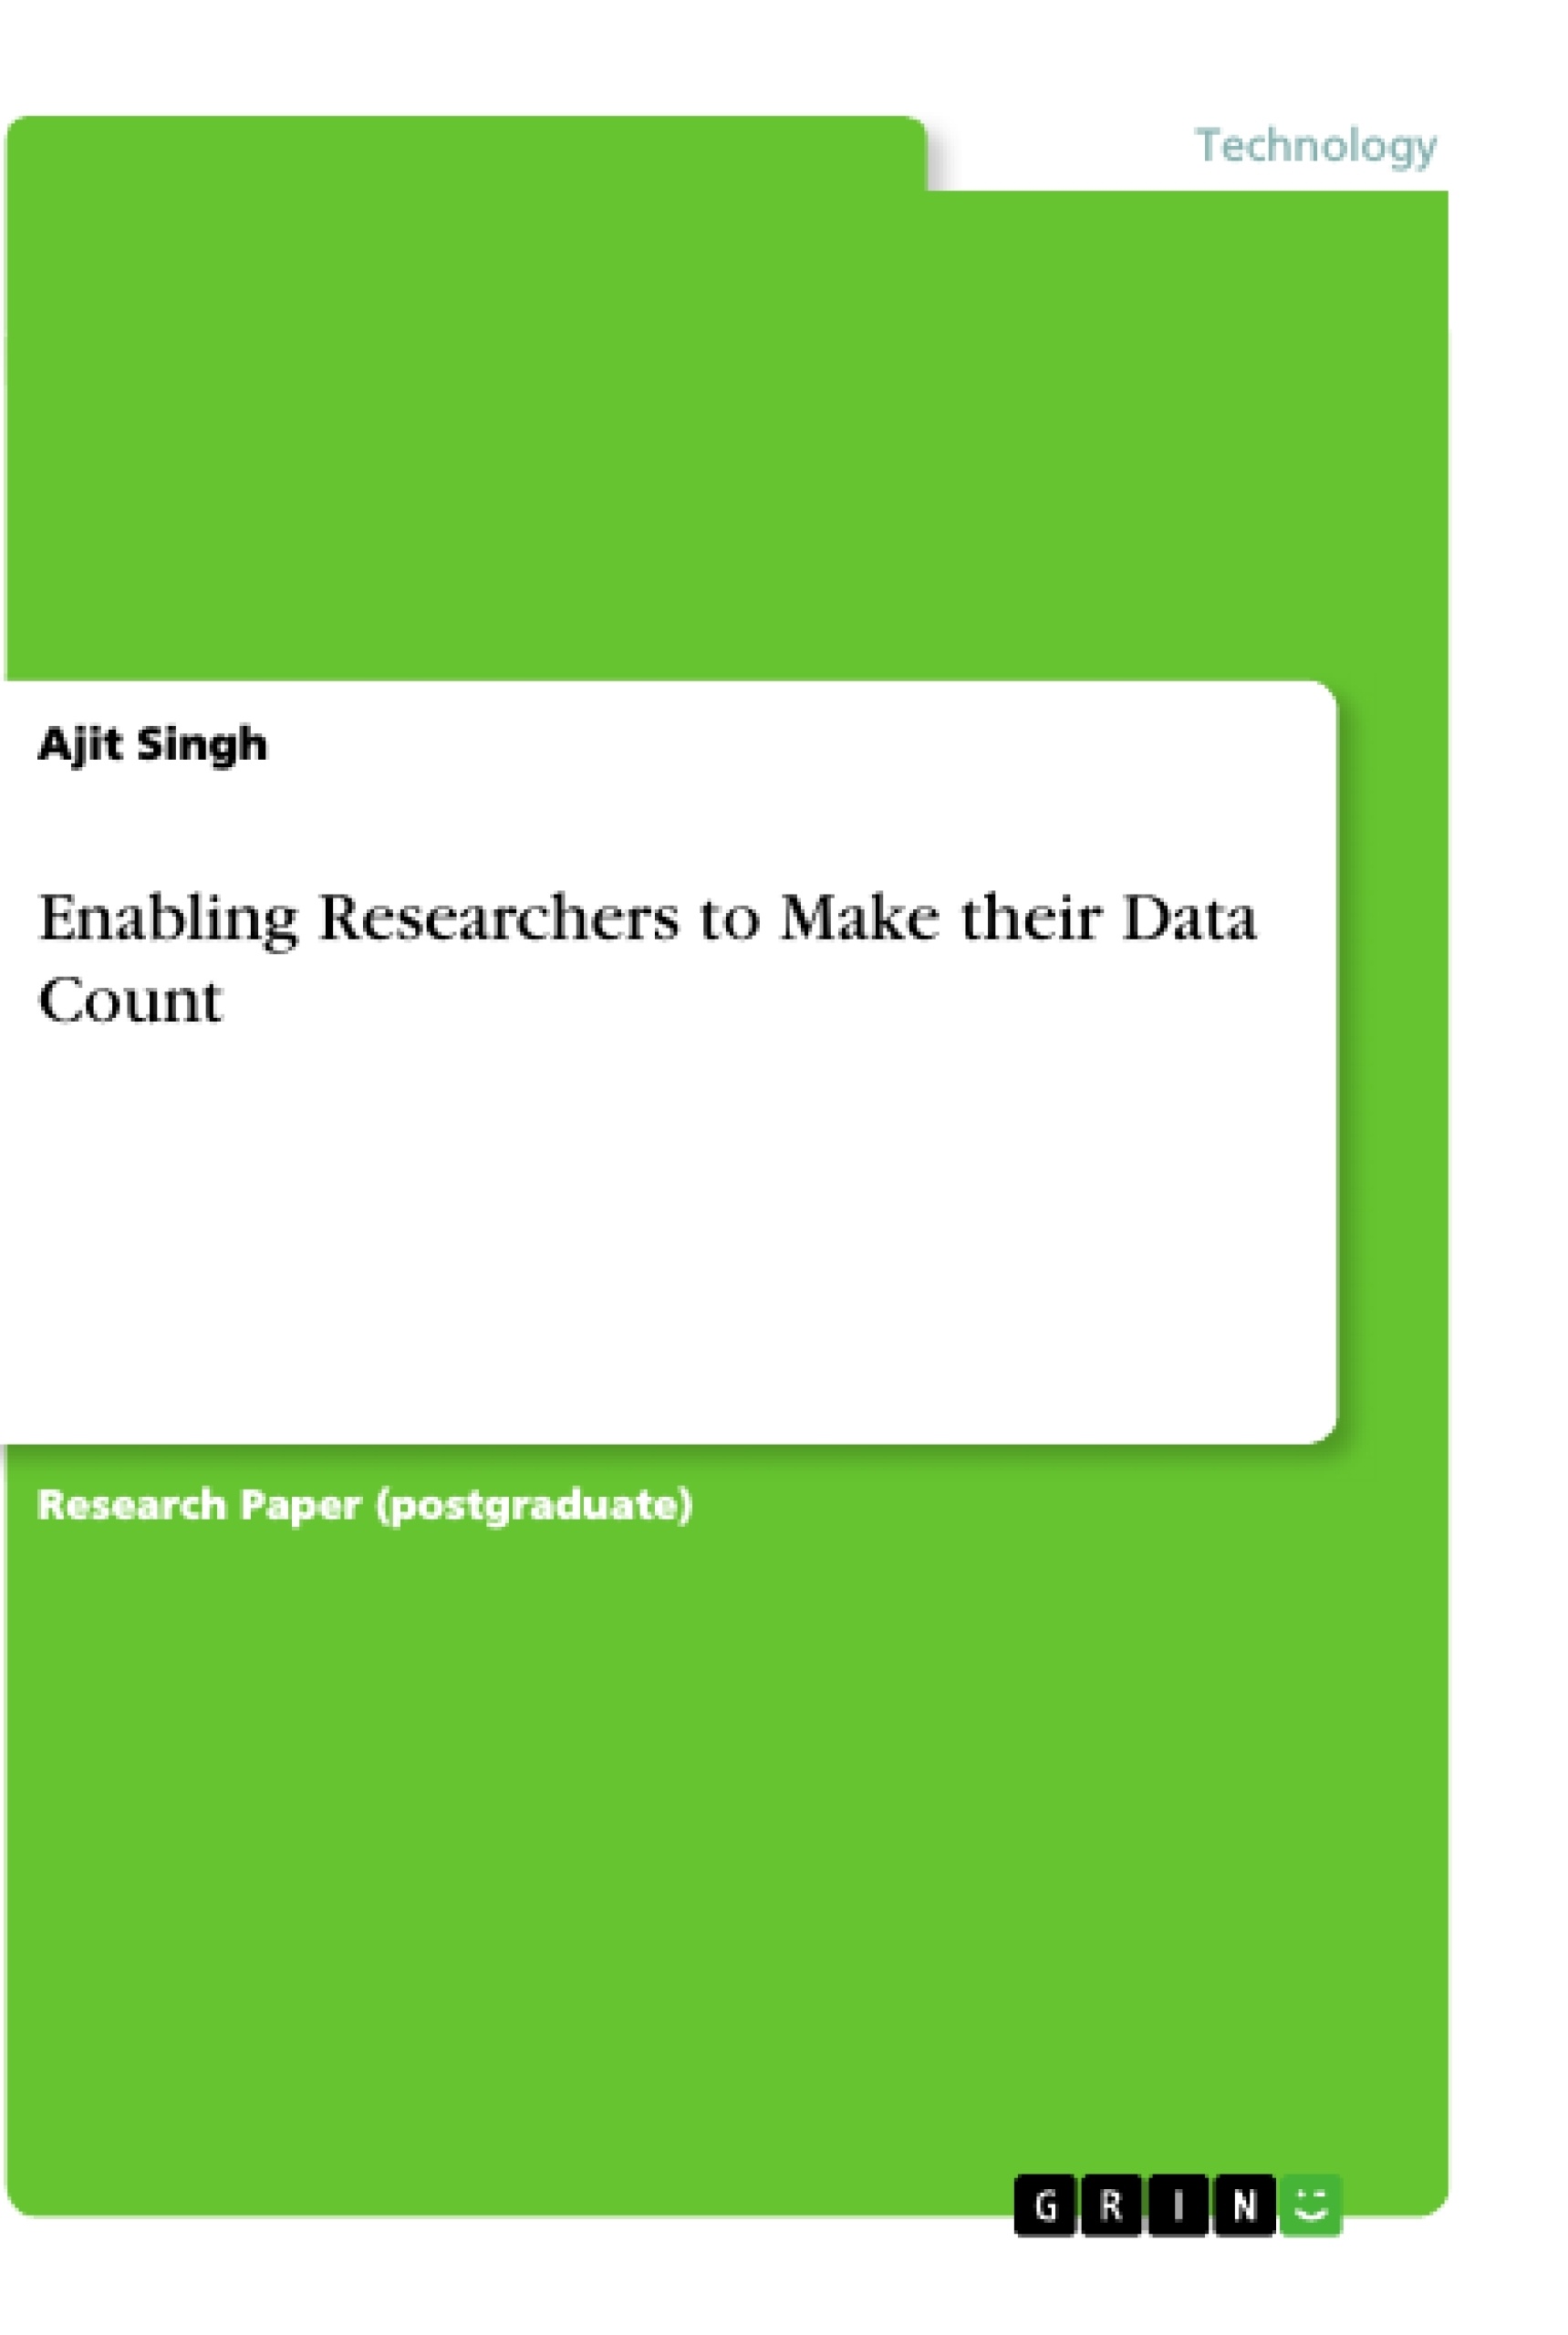 Title: Enabling Researchers to Make their Data Count